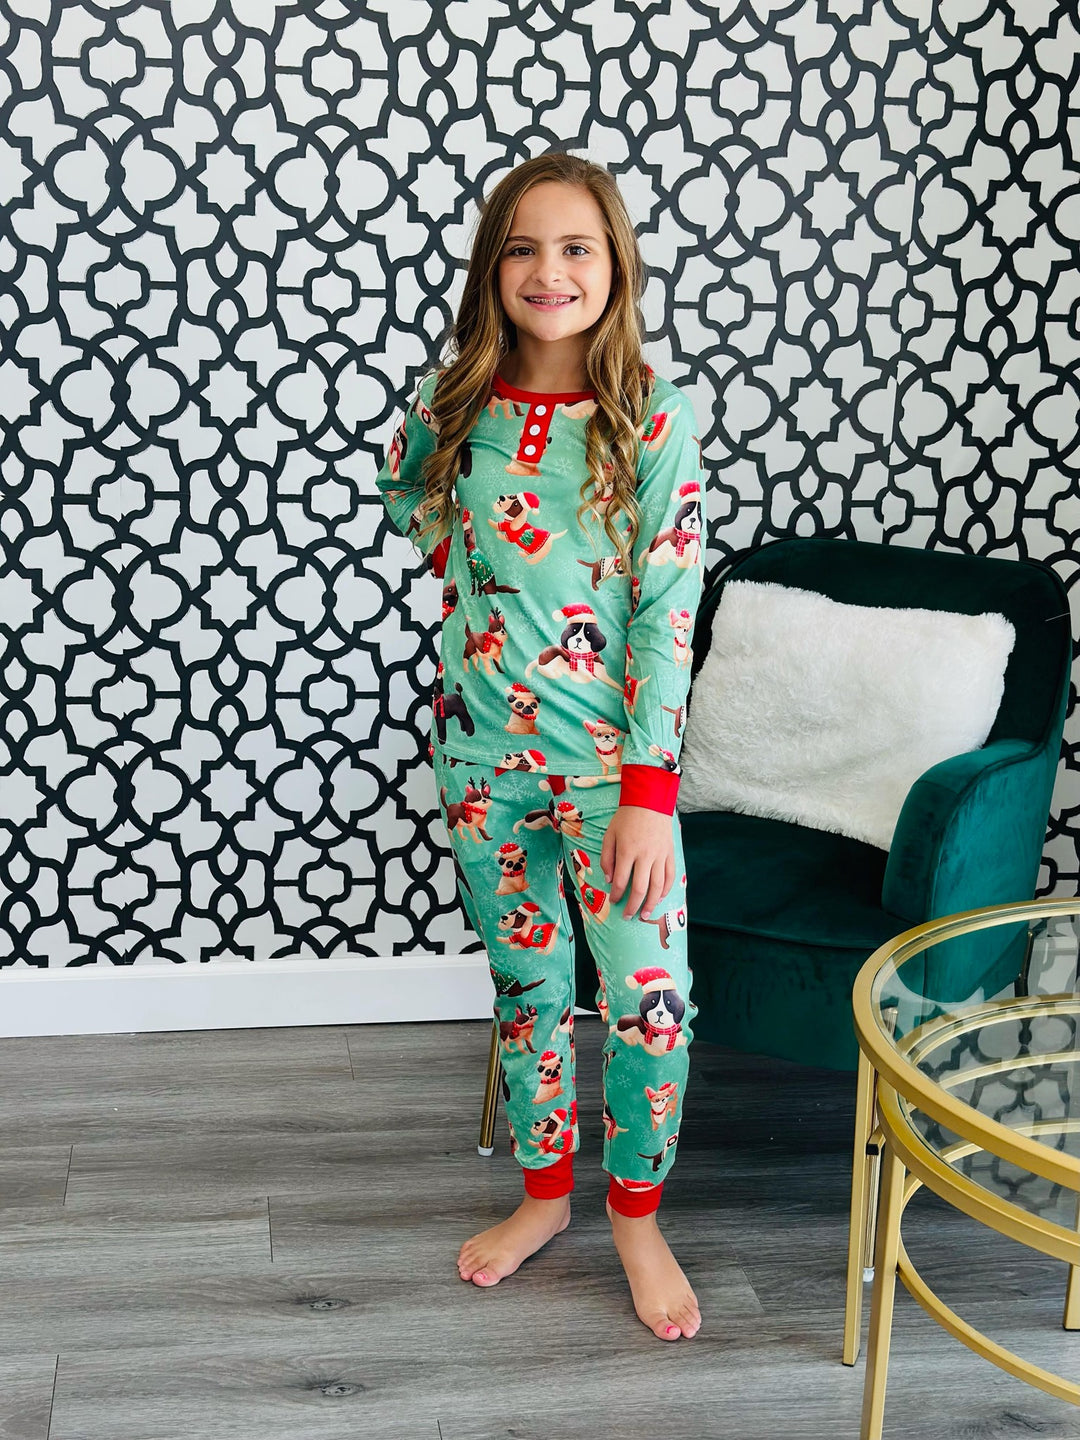 ** PREORDER** Shirley & Stone | Family Holiday PJ's | Furry Friends - ESTIMATED TO SHIP EARLY NOVEMBER